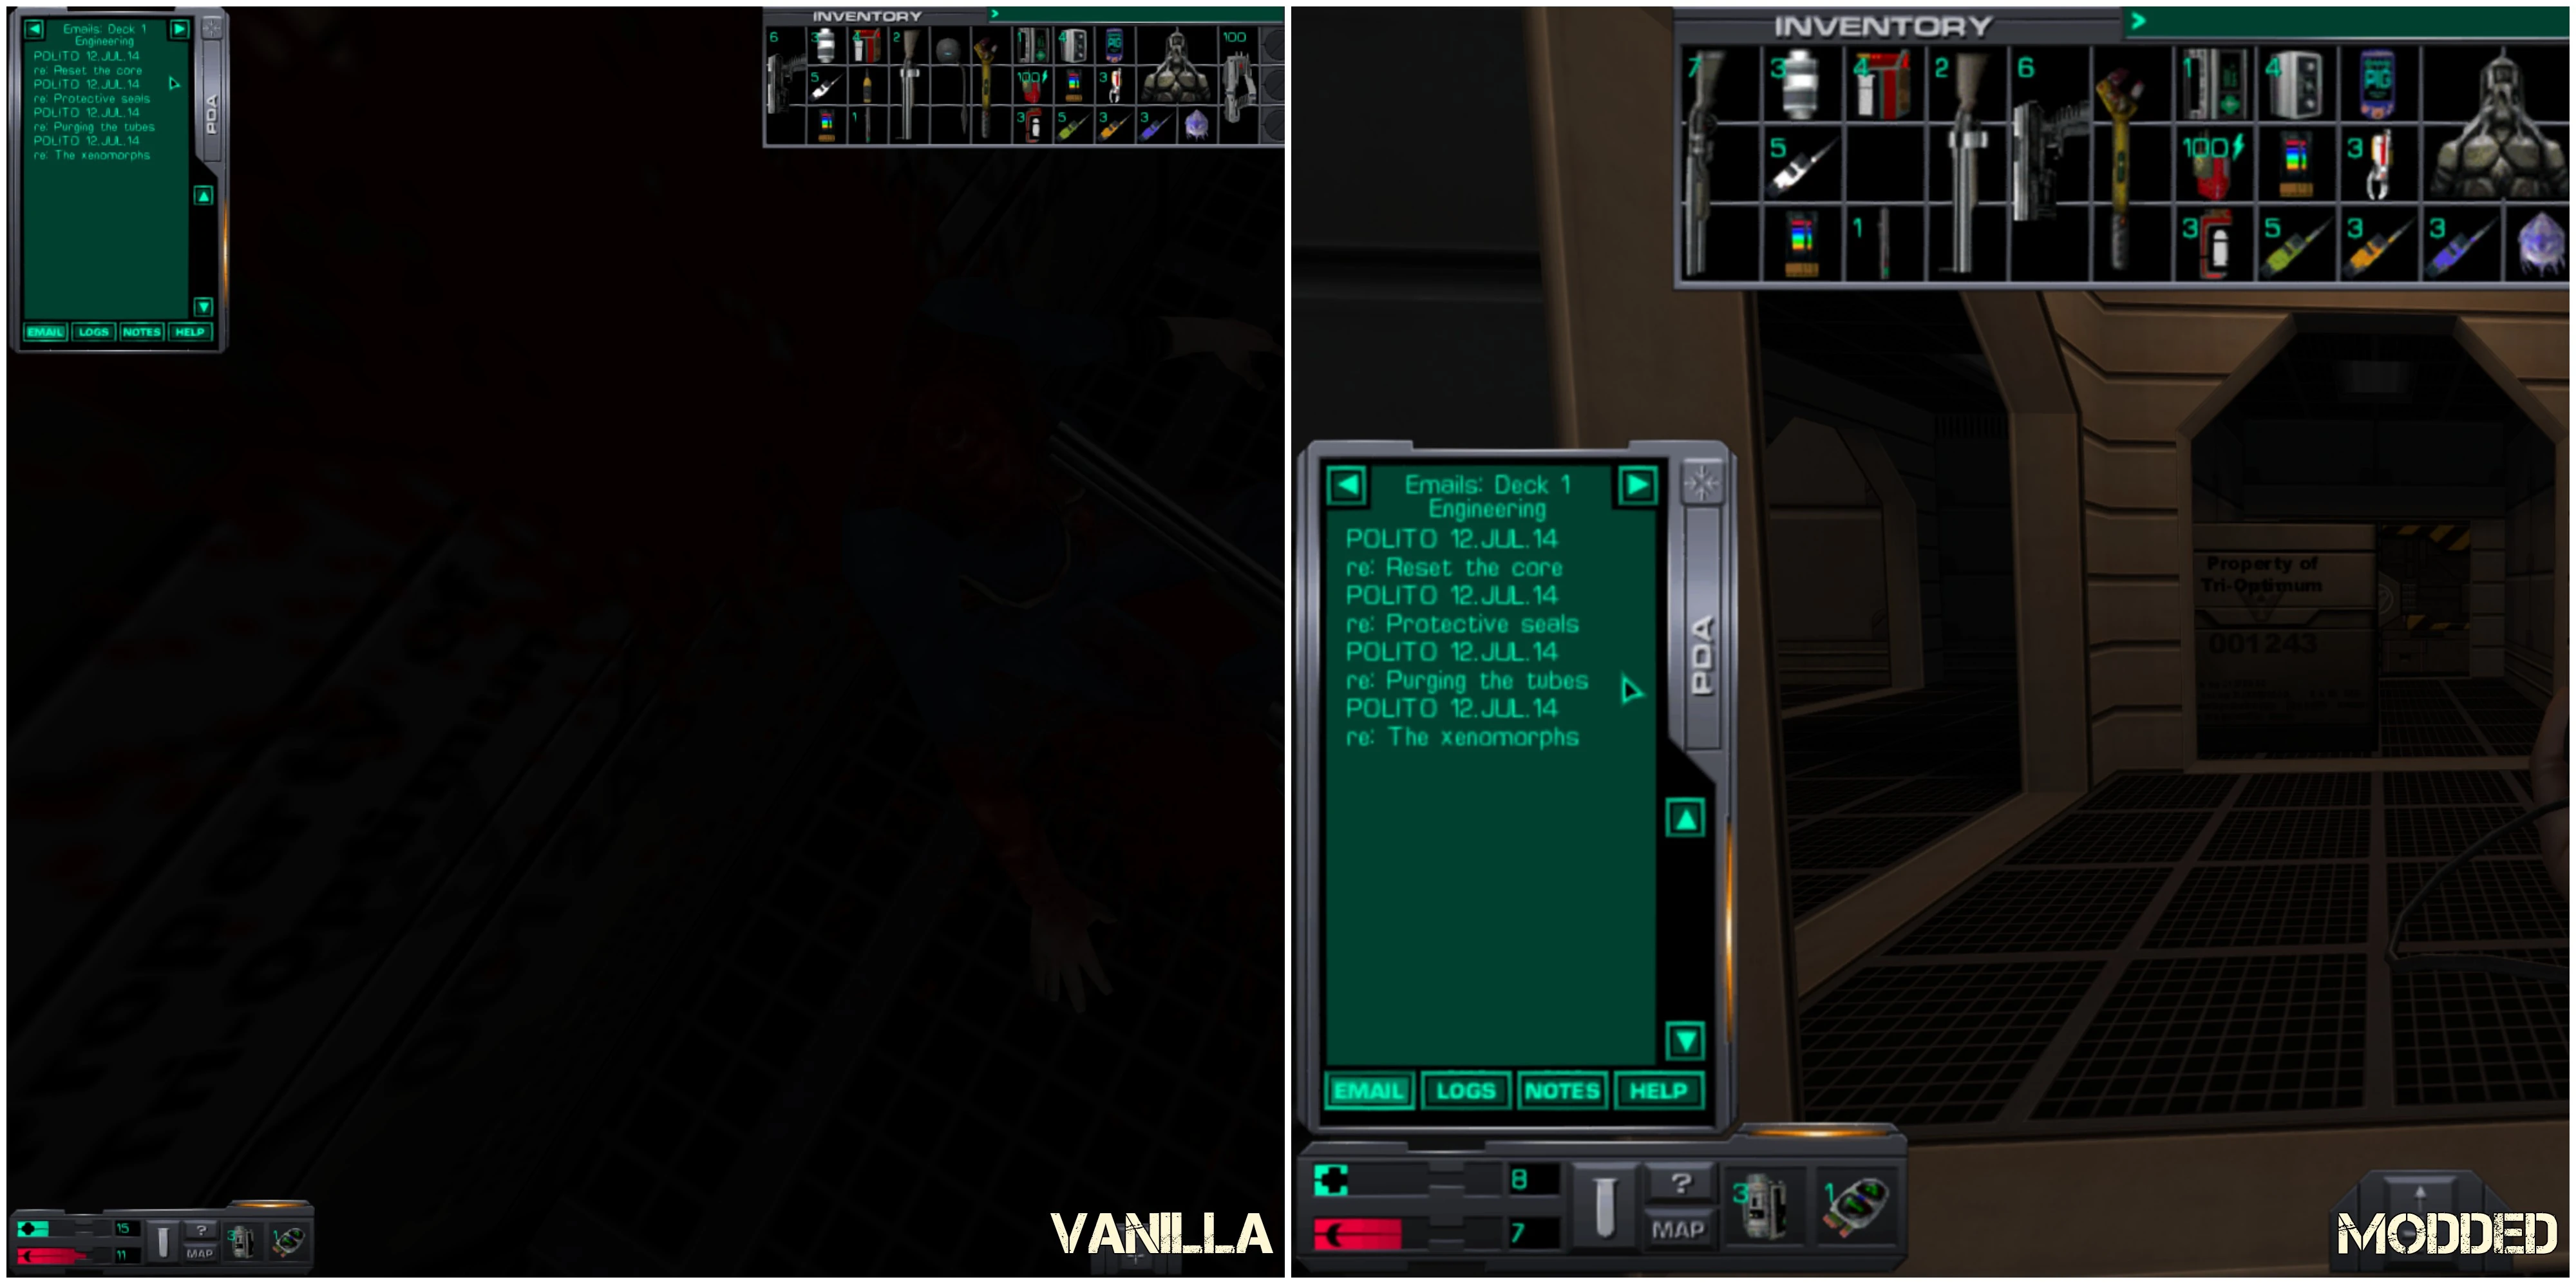 system shock 2 multiplayer was it a mod